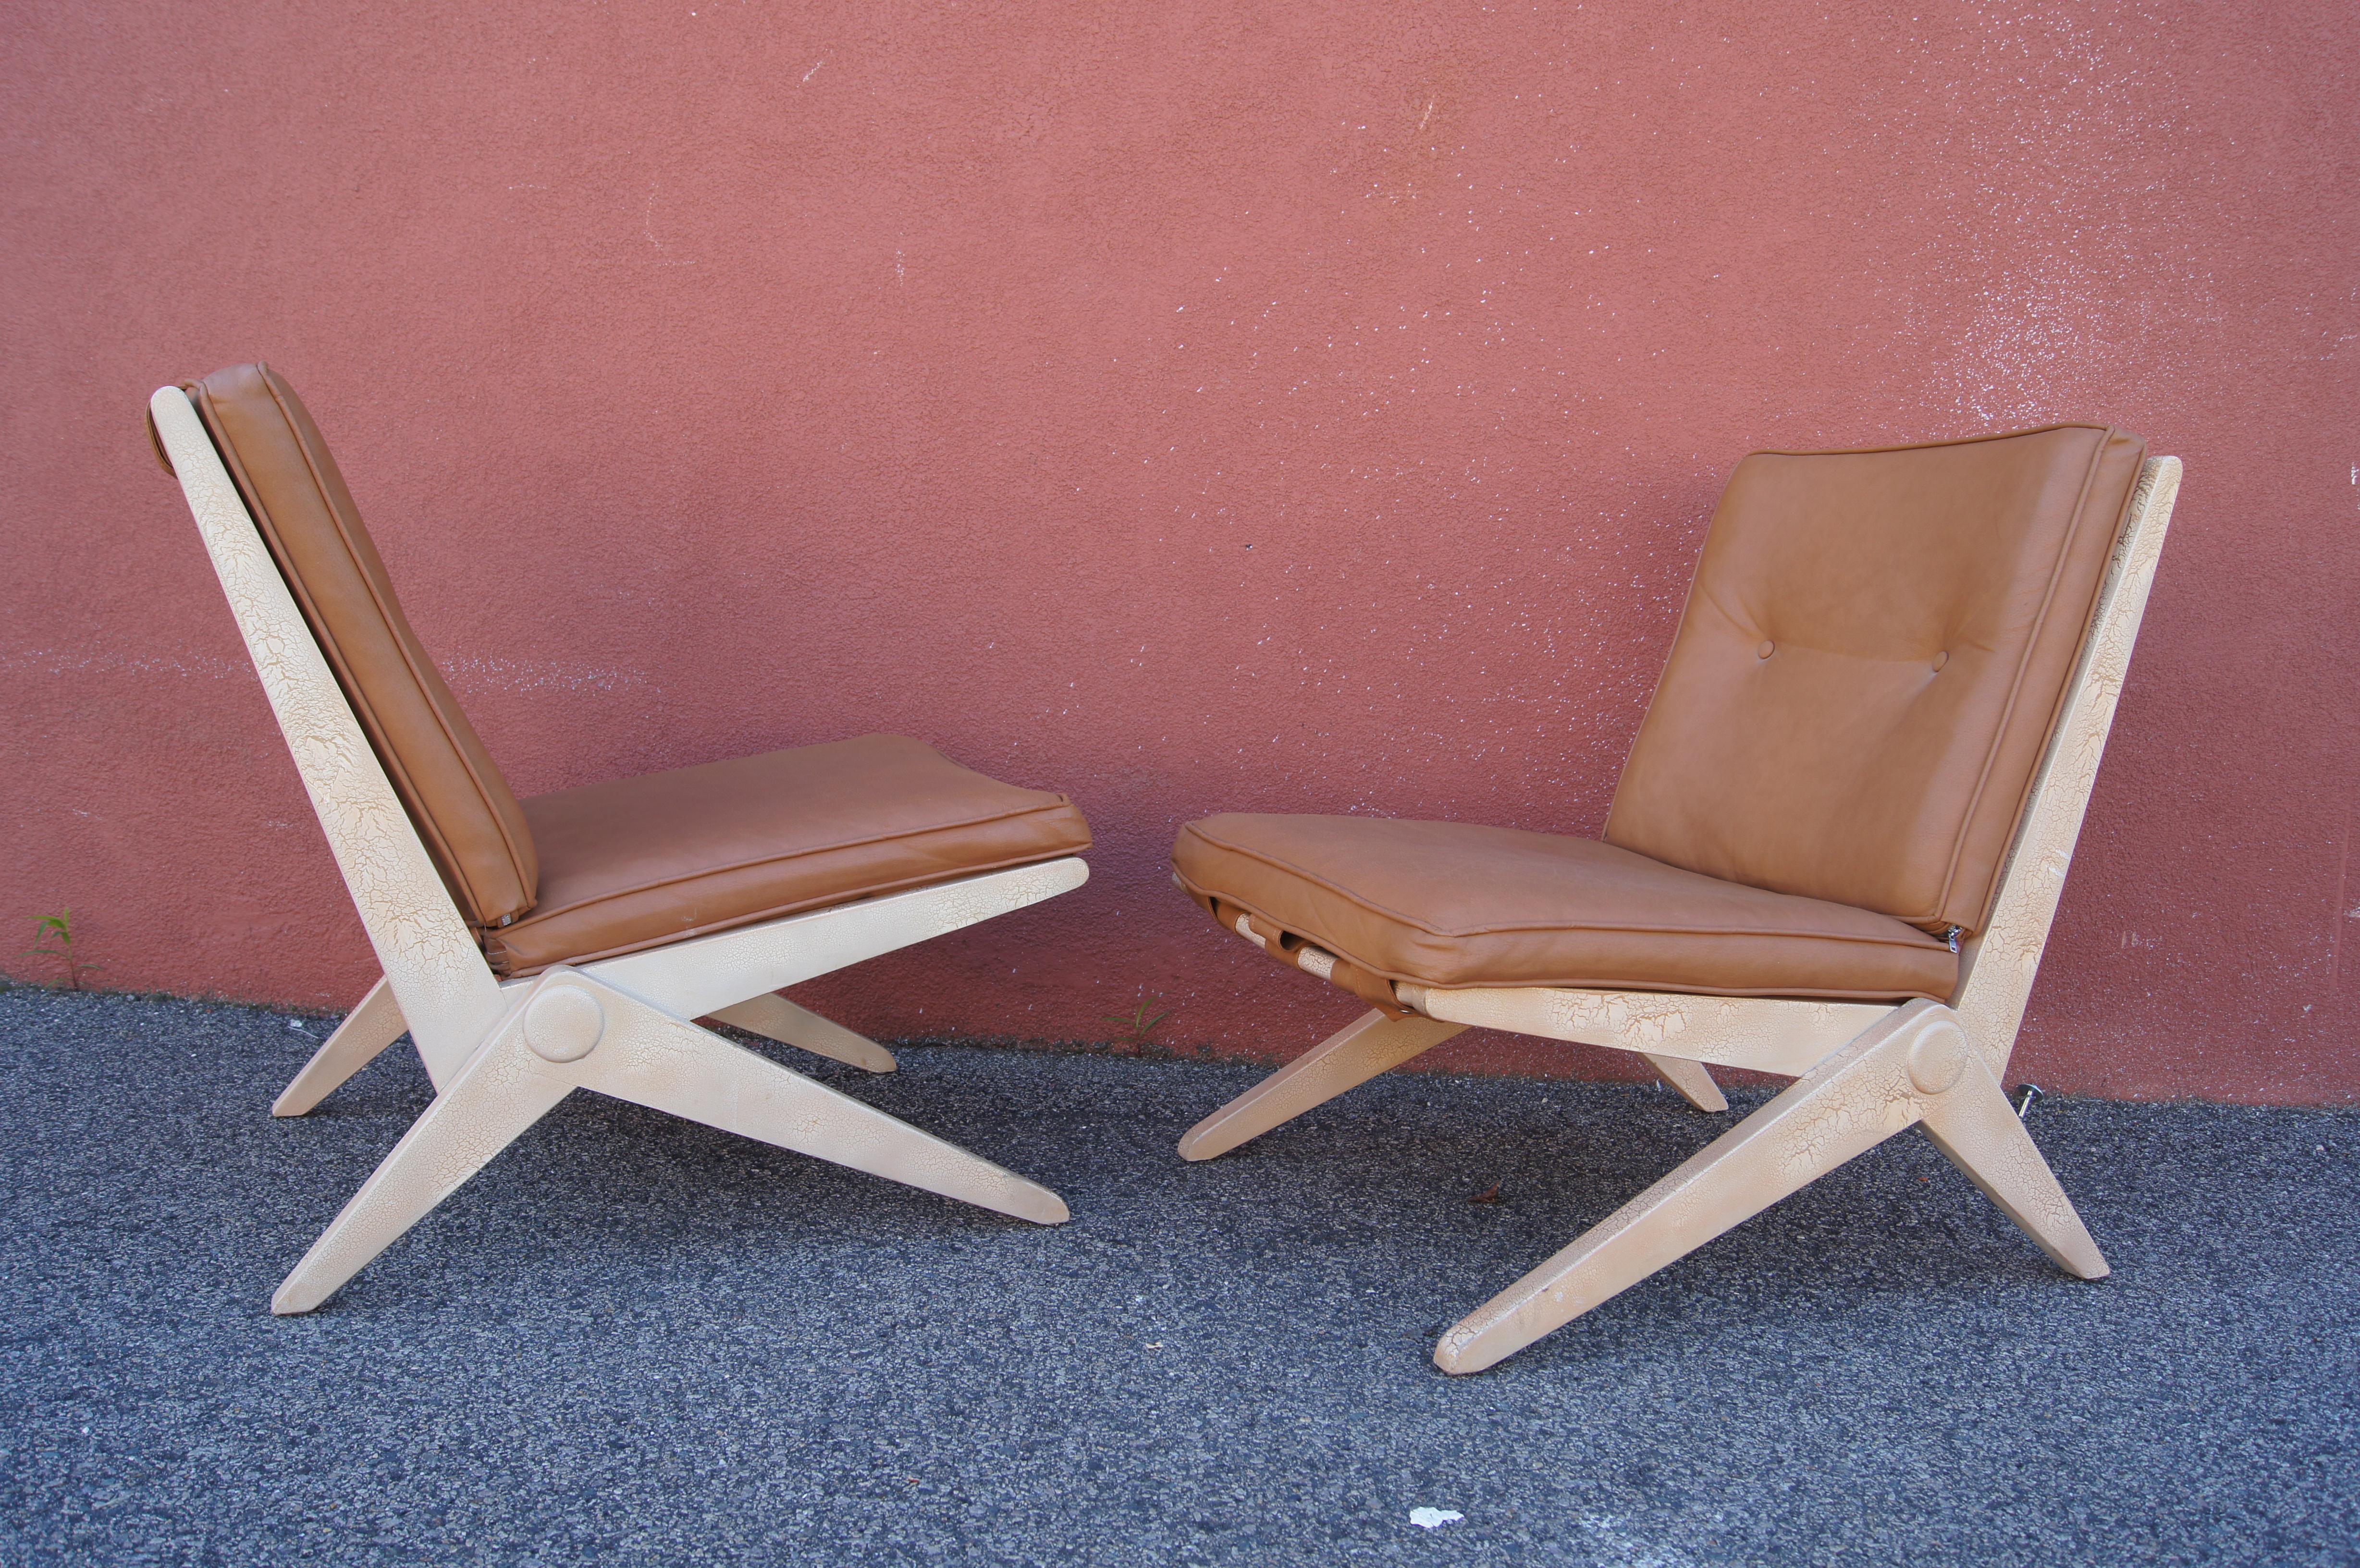 American Pair of Scissor Chairs, Model 92, by Pierre Jeanneret for Knoll